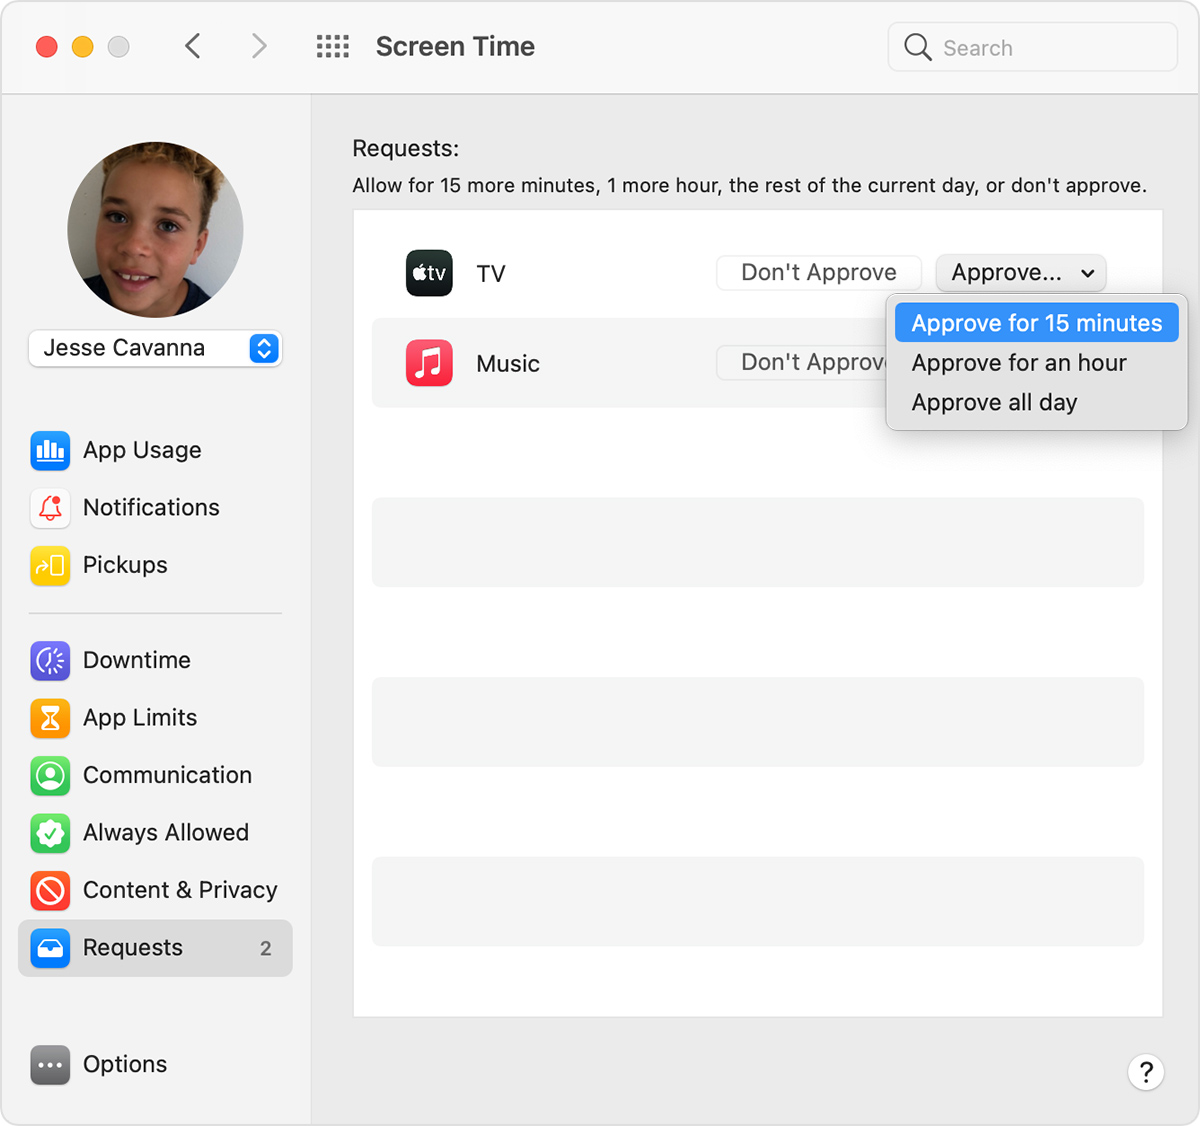 Screen Time preferences: Requests